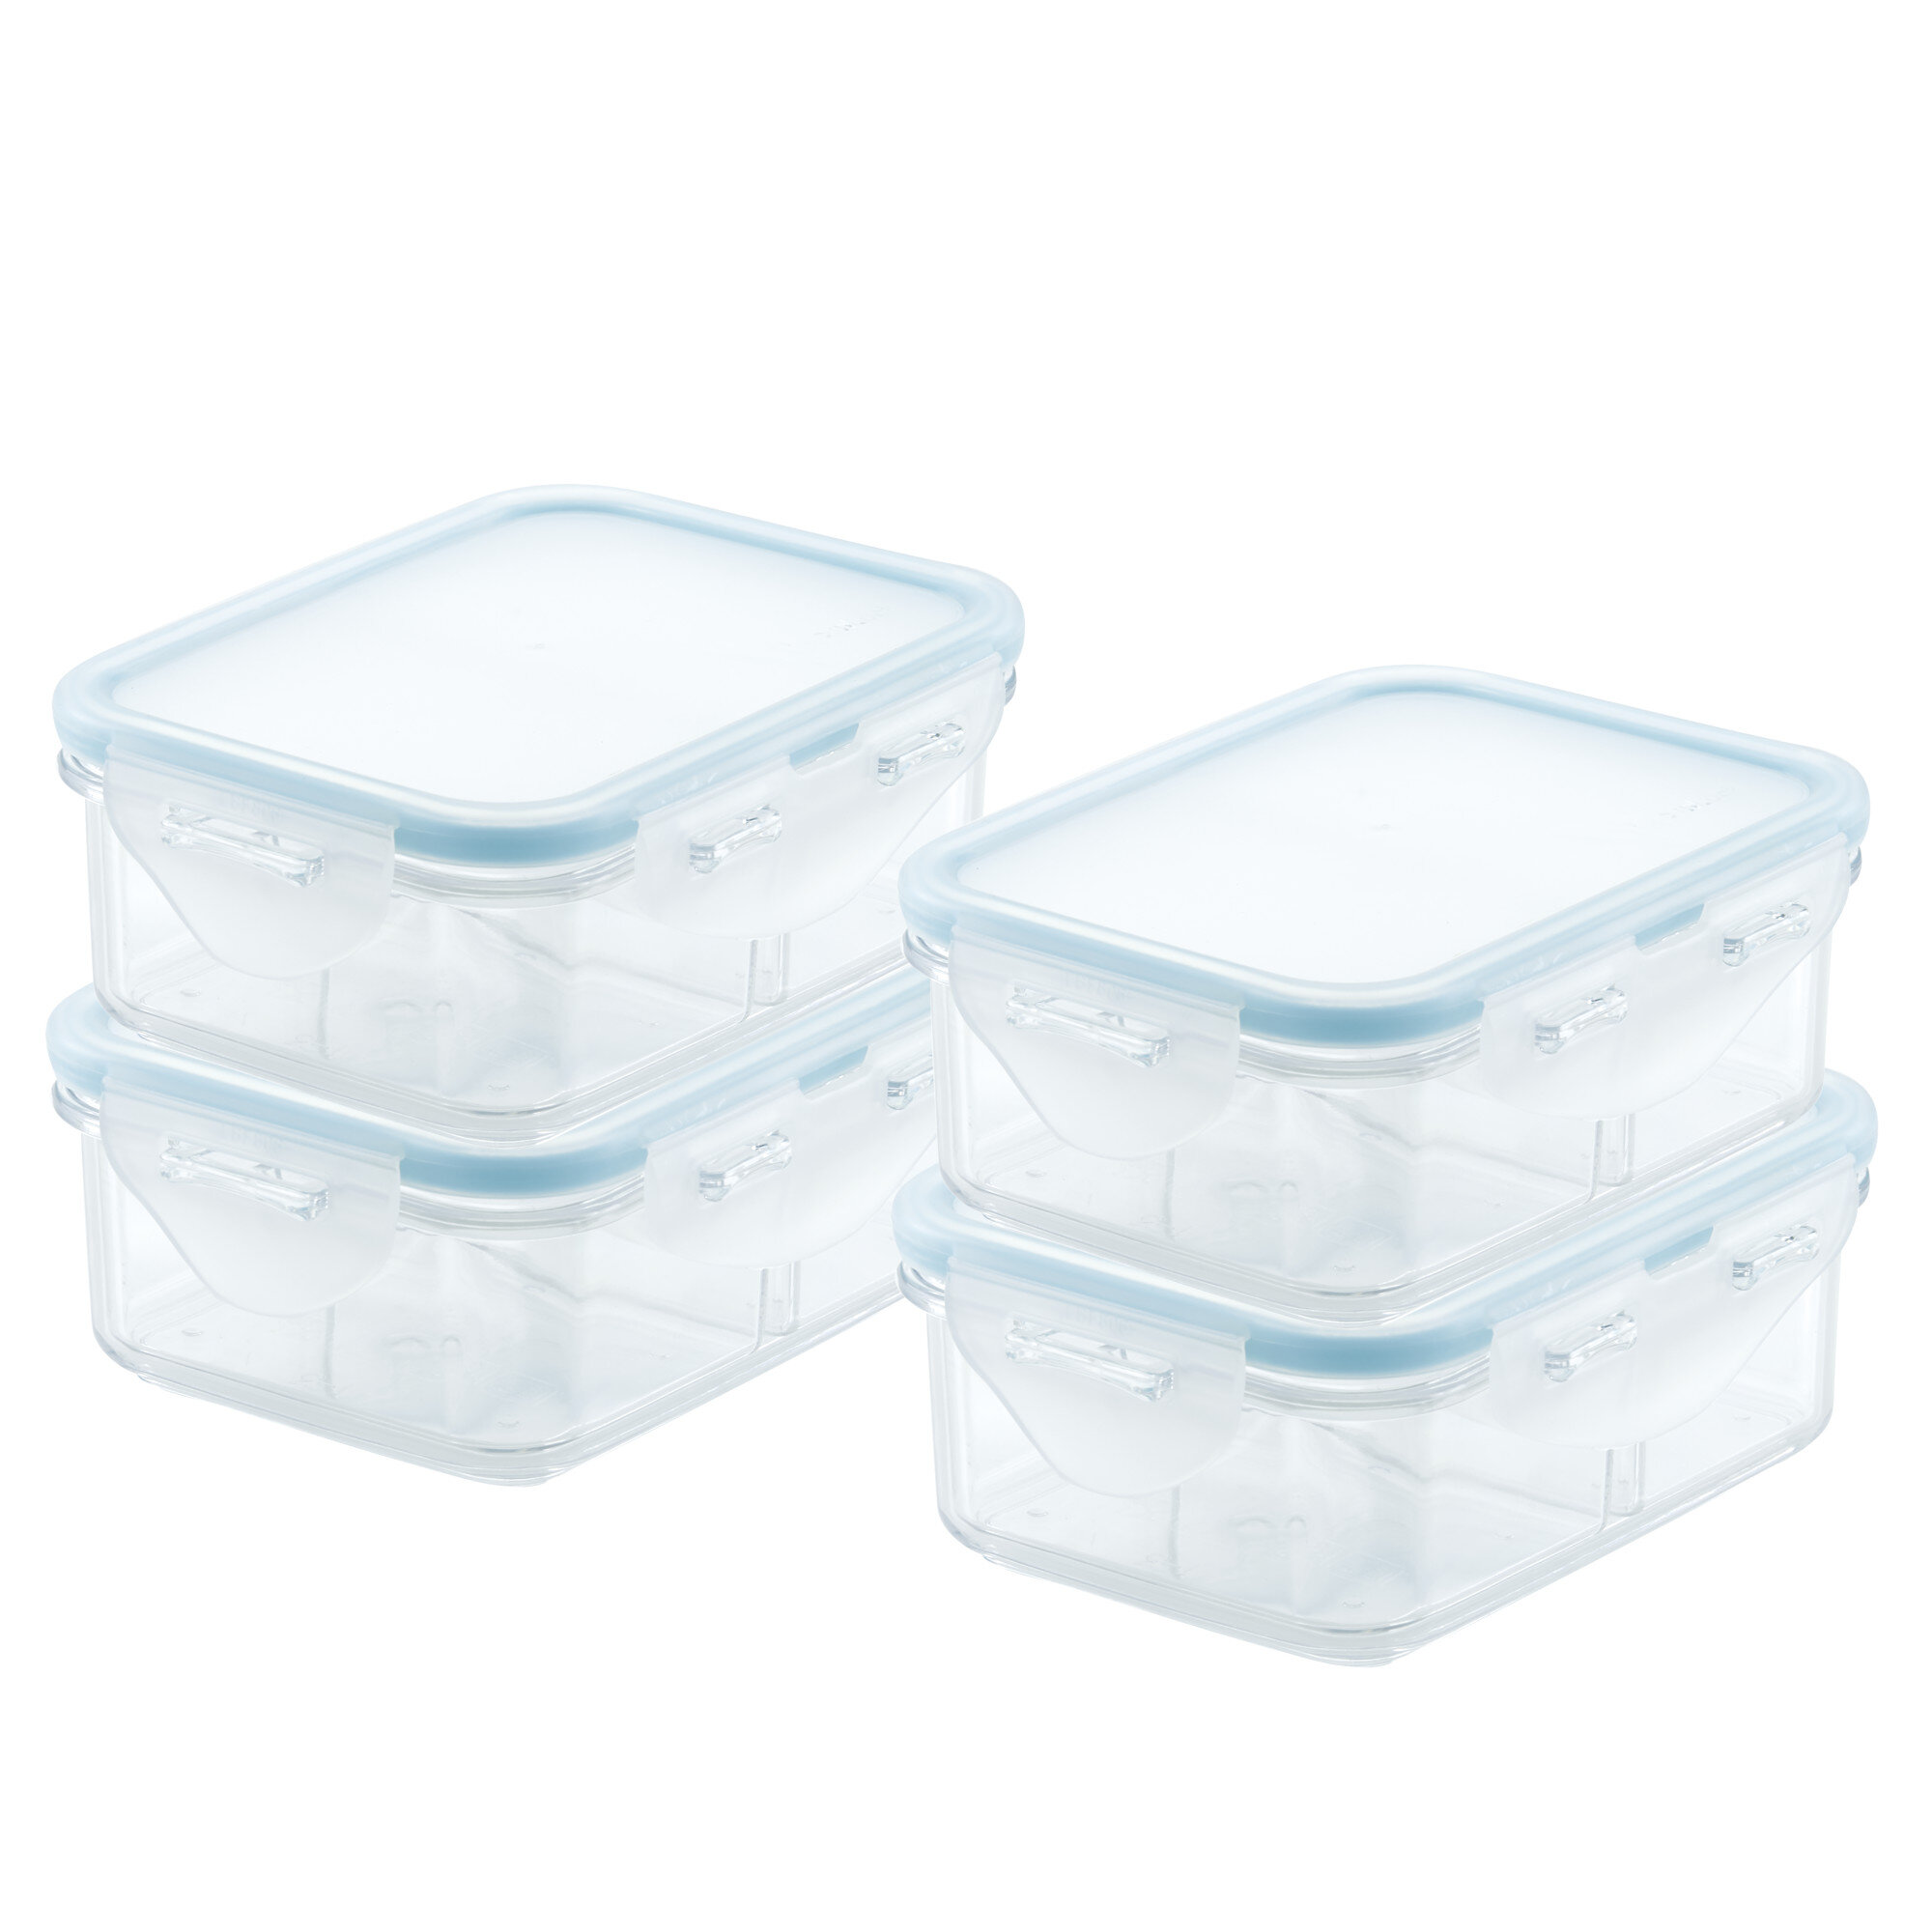 LocknLock Purely Better Food Storage Container - Set of 4